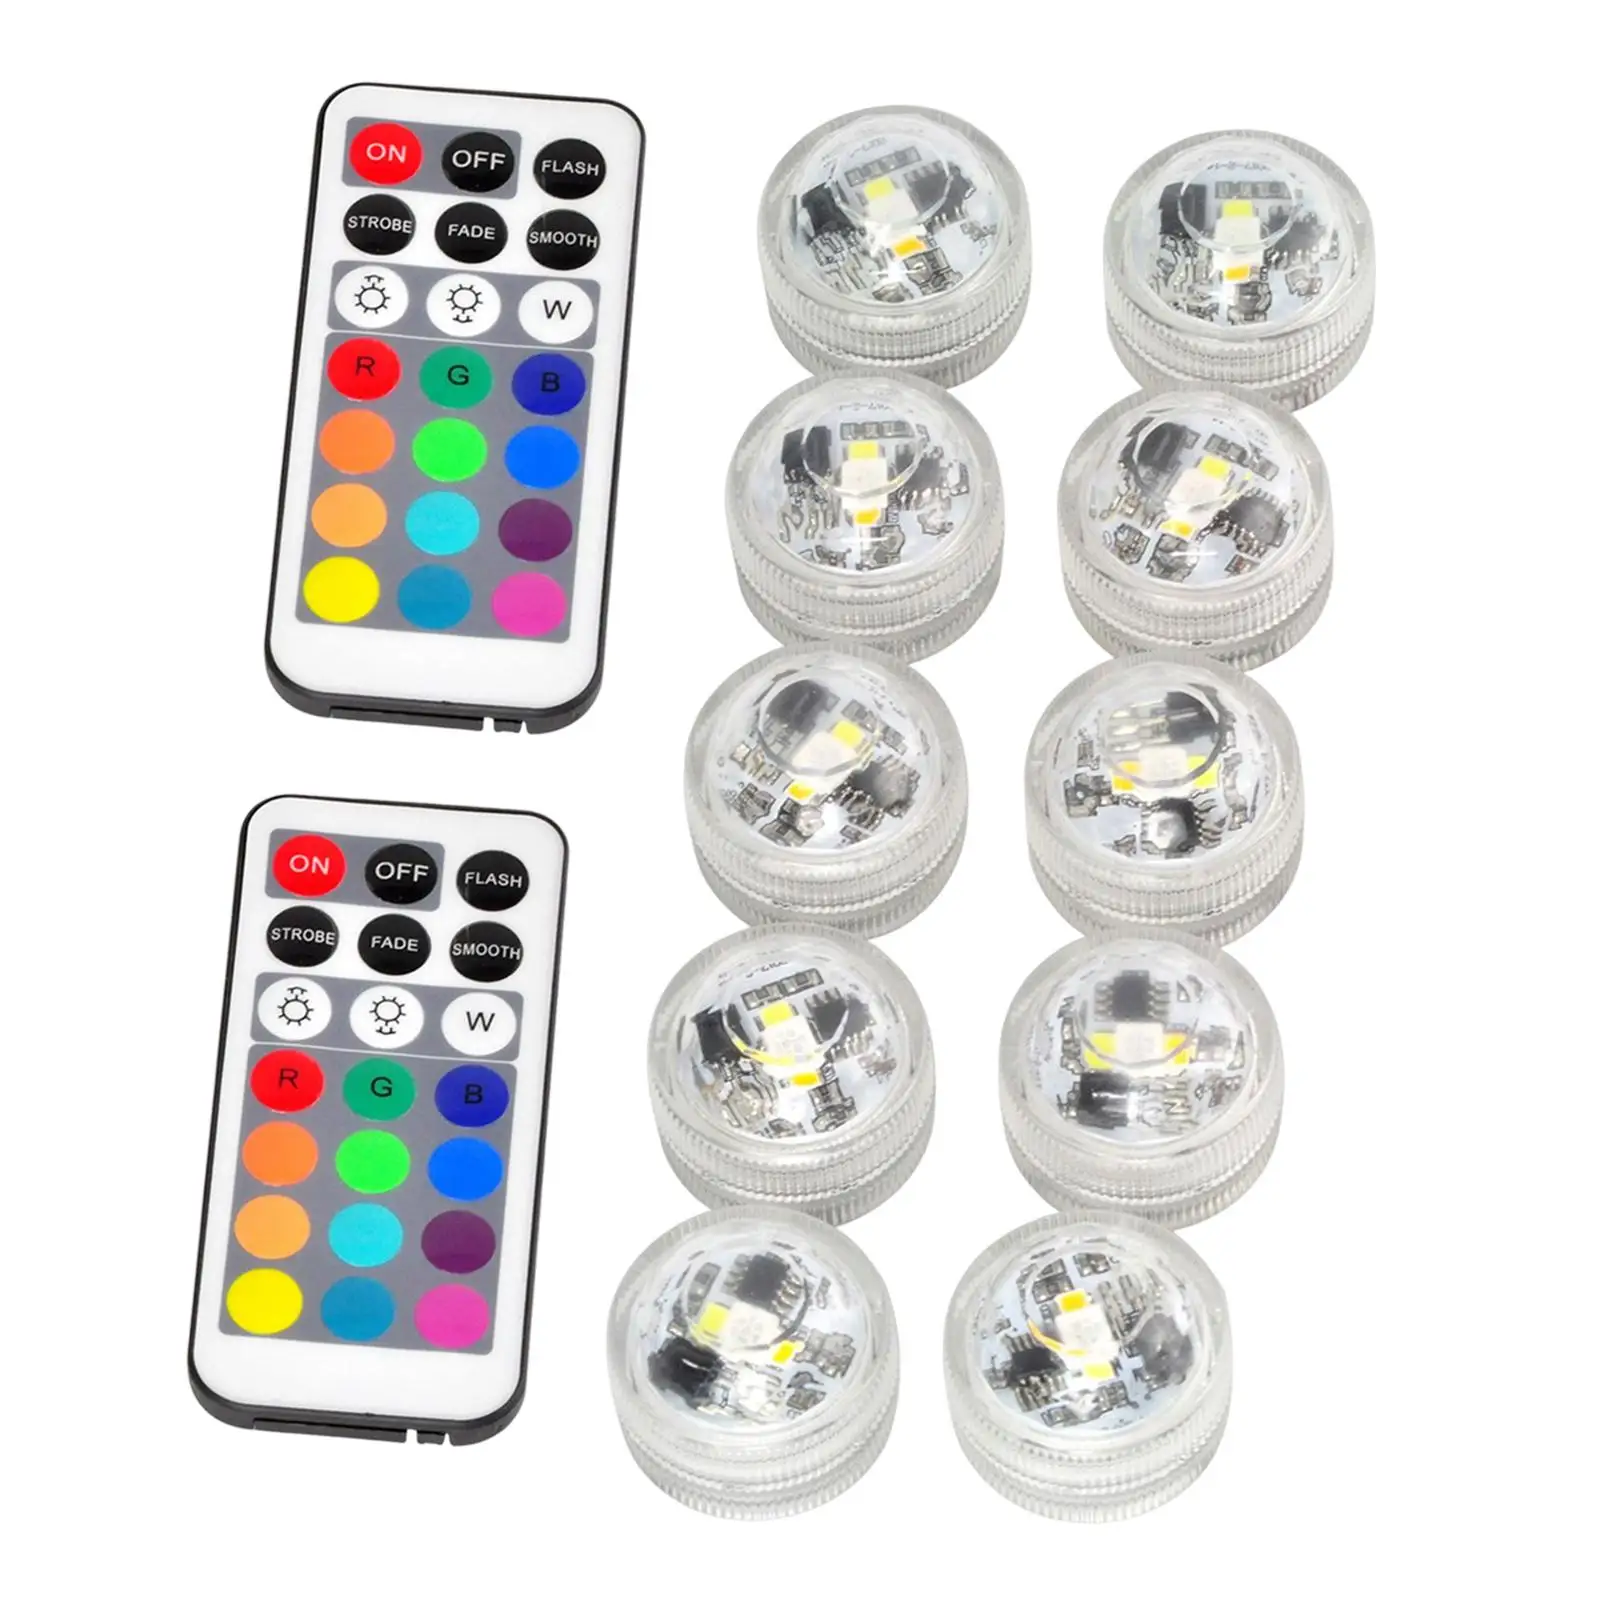 10Pcs LED Lights Submersible with Remote IP65 Party Hot Tub Fountains